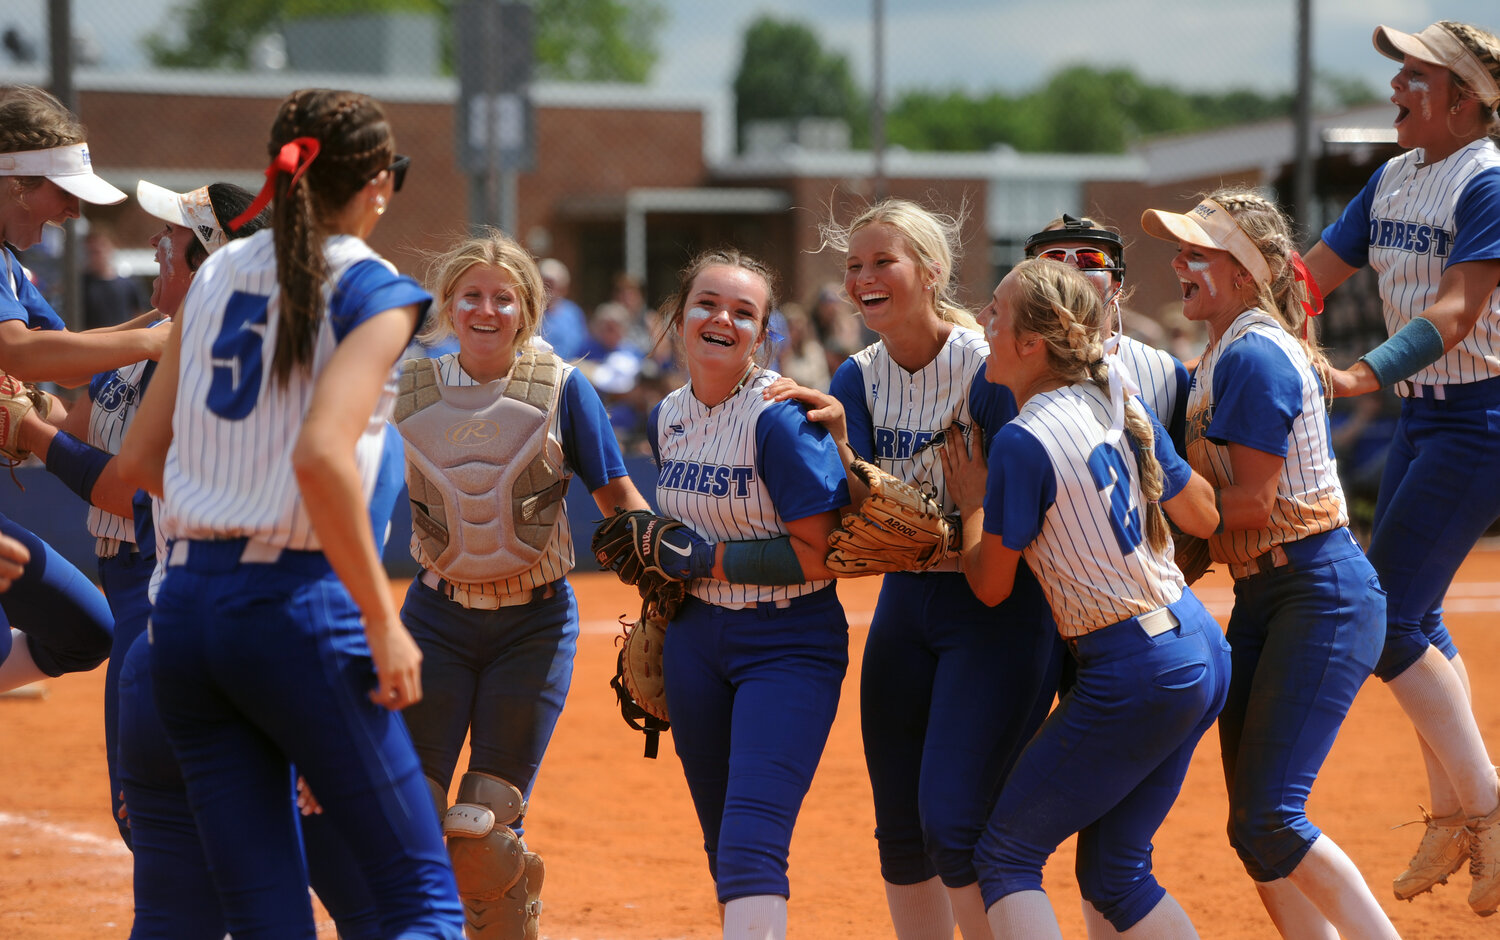 The Lady Rocket dugout empties and swarms pitcher Taylor Moreland after the final out is recorded, securing Forrest’s spot in the upcoming Class 2-A state tournament.